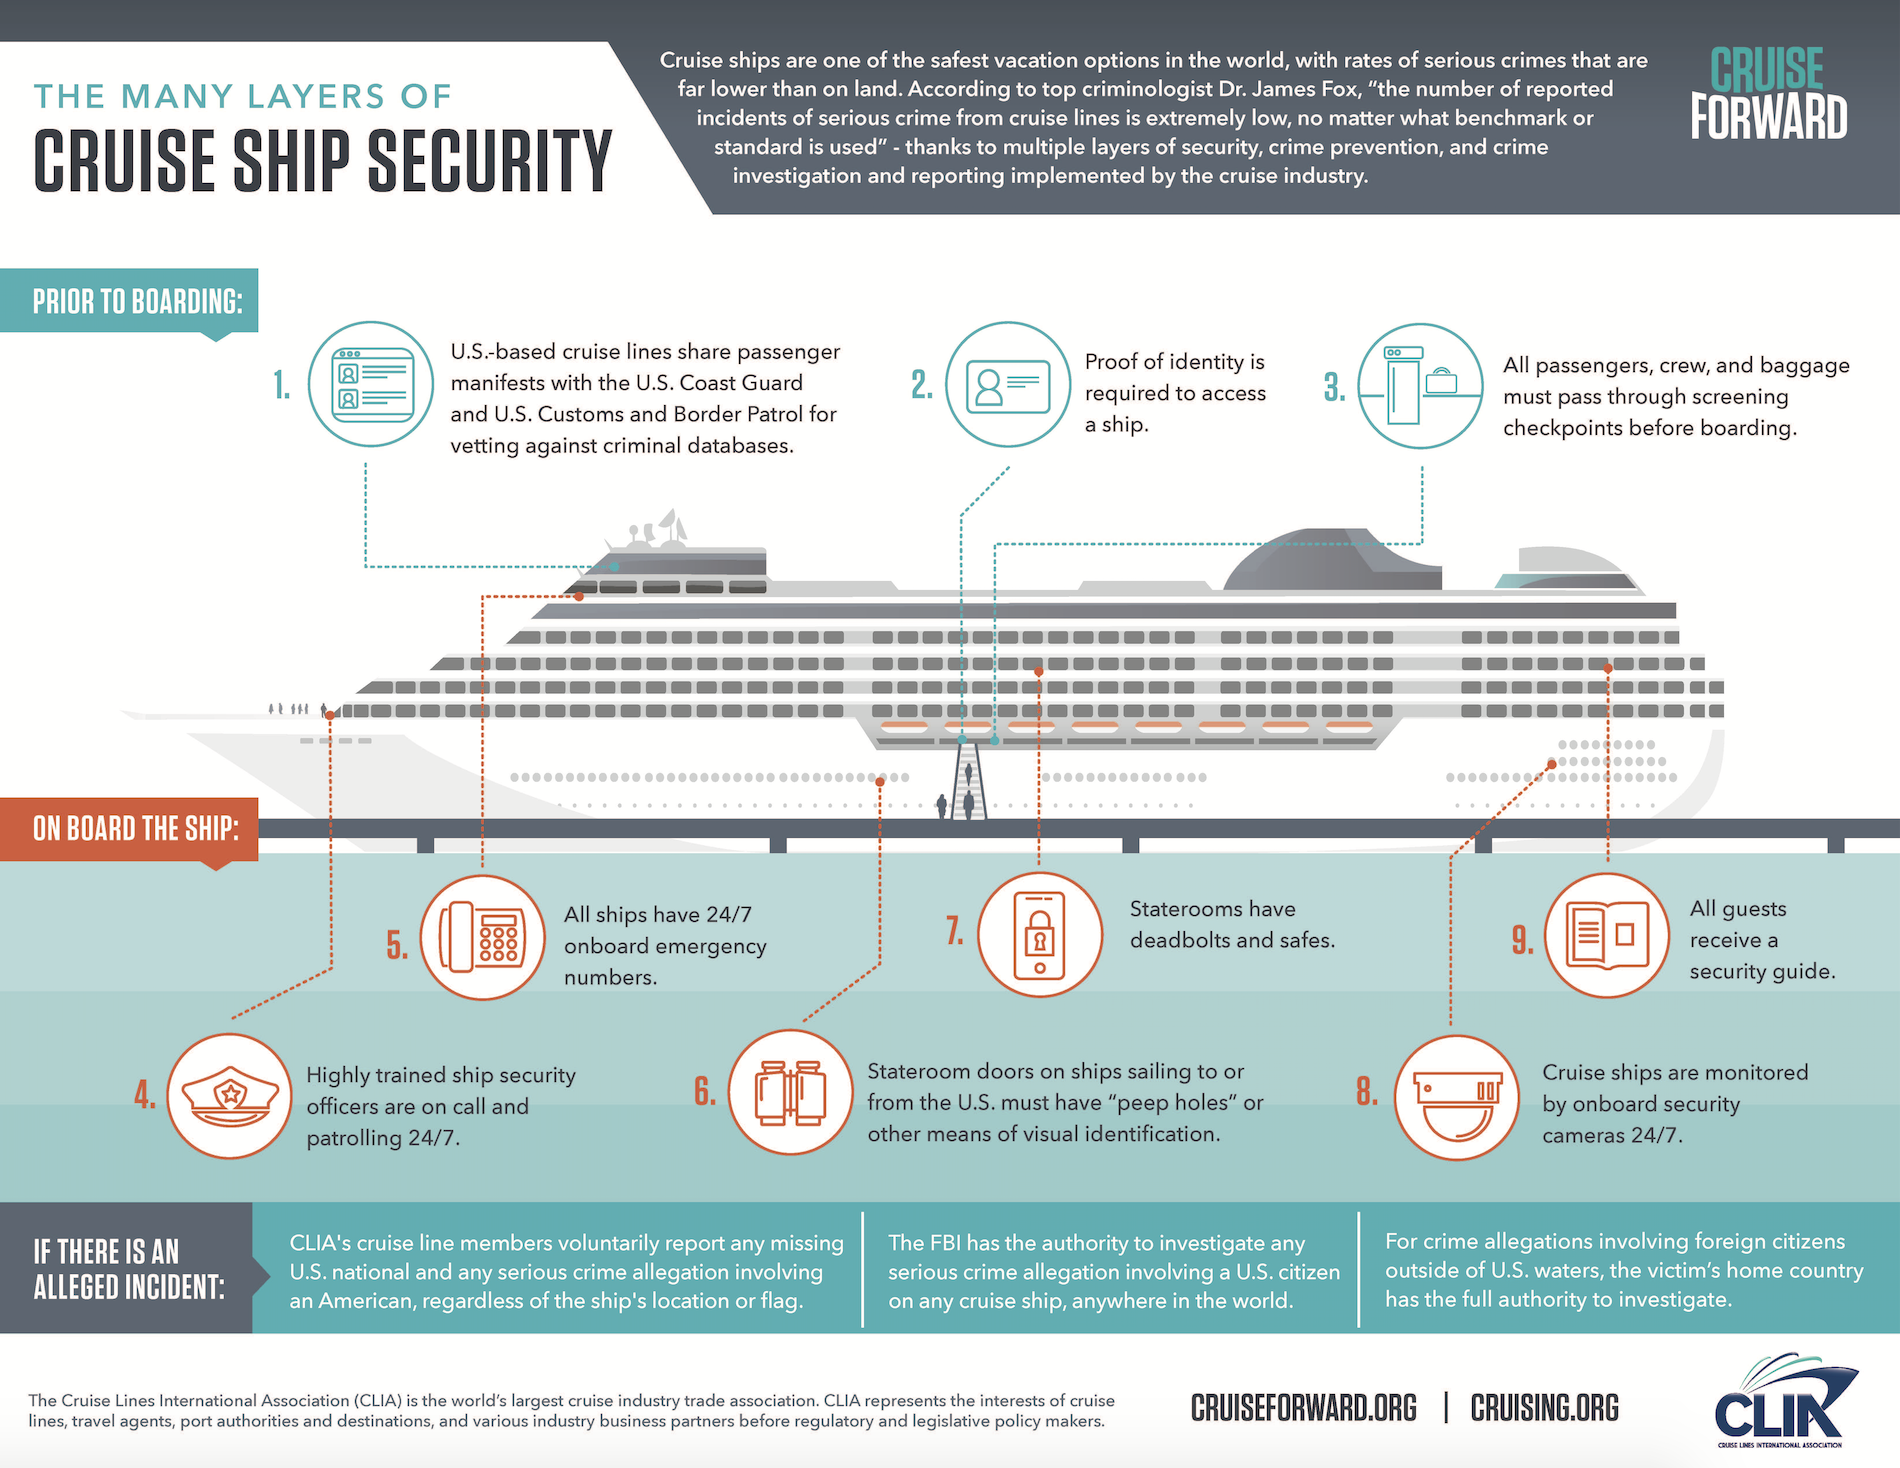 The Many Layers of Cruise Ship Safety